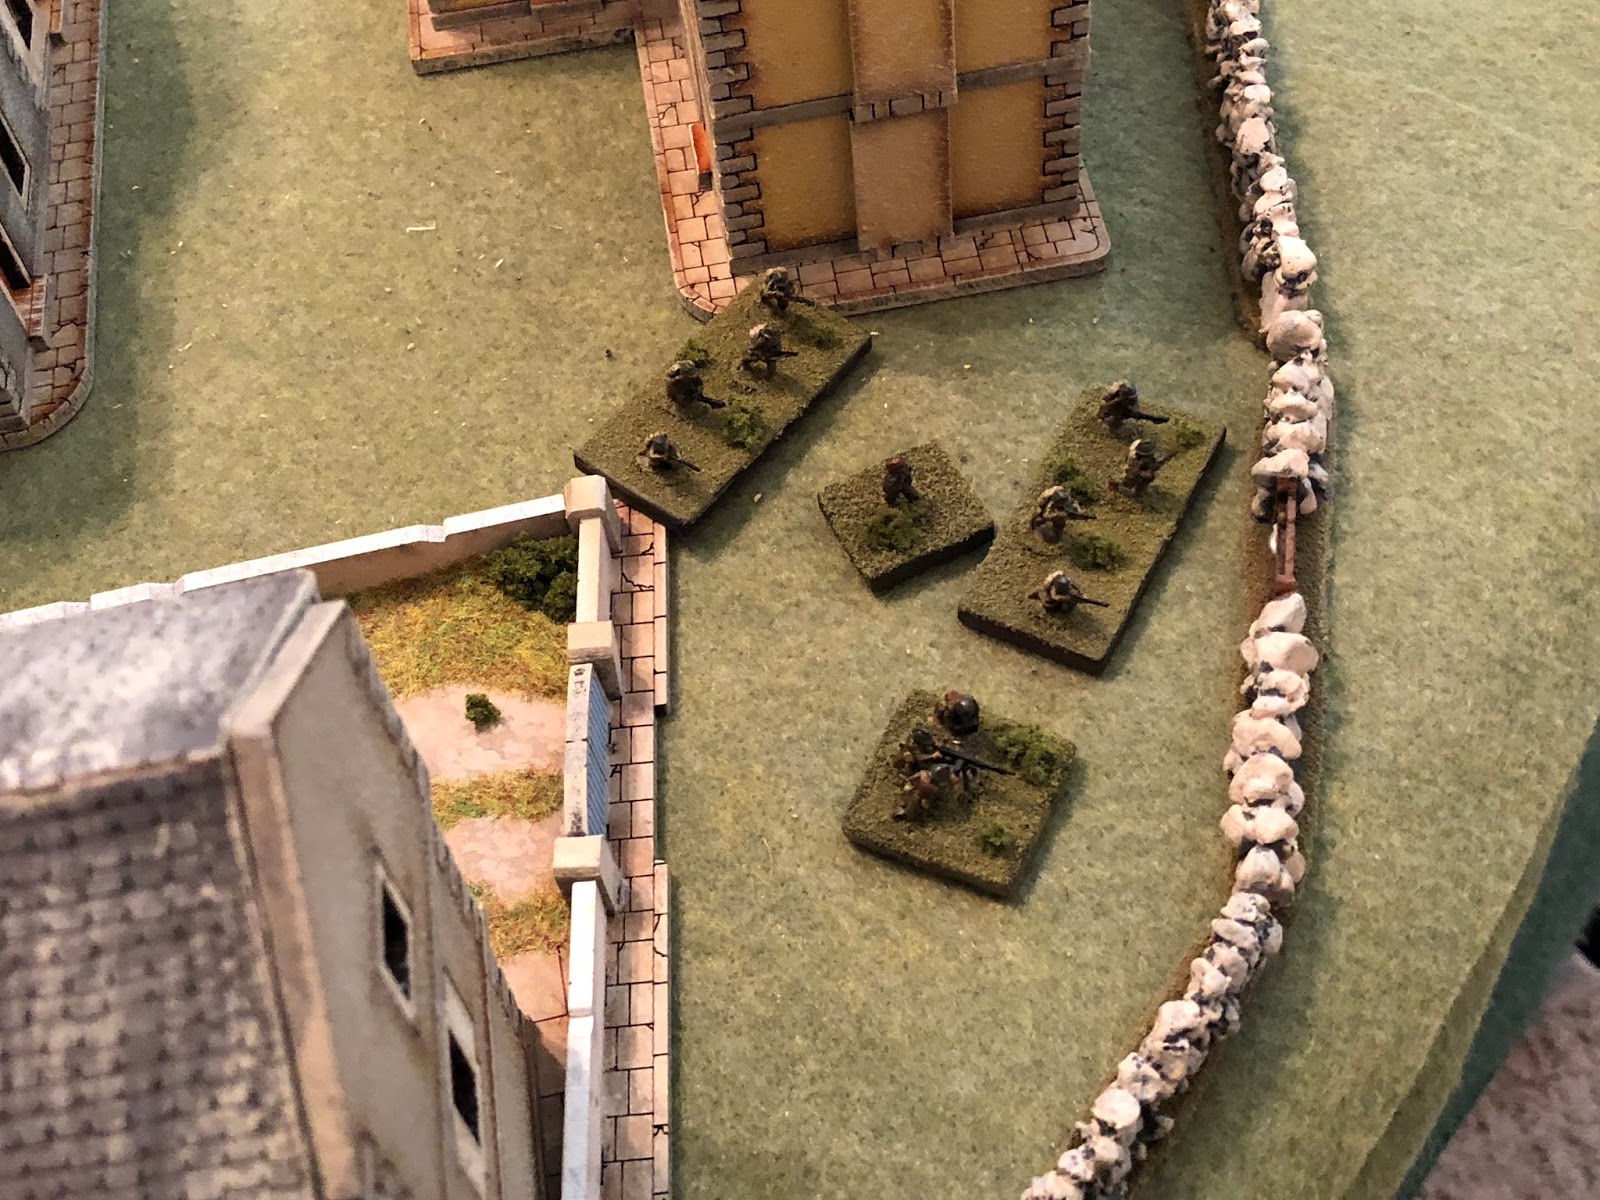  While the French anti-tank gunners spiked their gun and fell back, joining the machine gun team and last remaining squads from 1st and 2nd Platoons. 